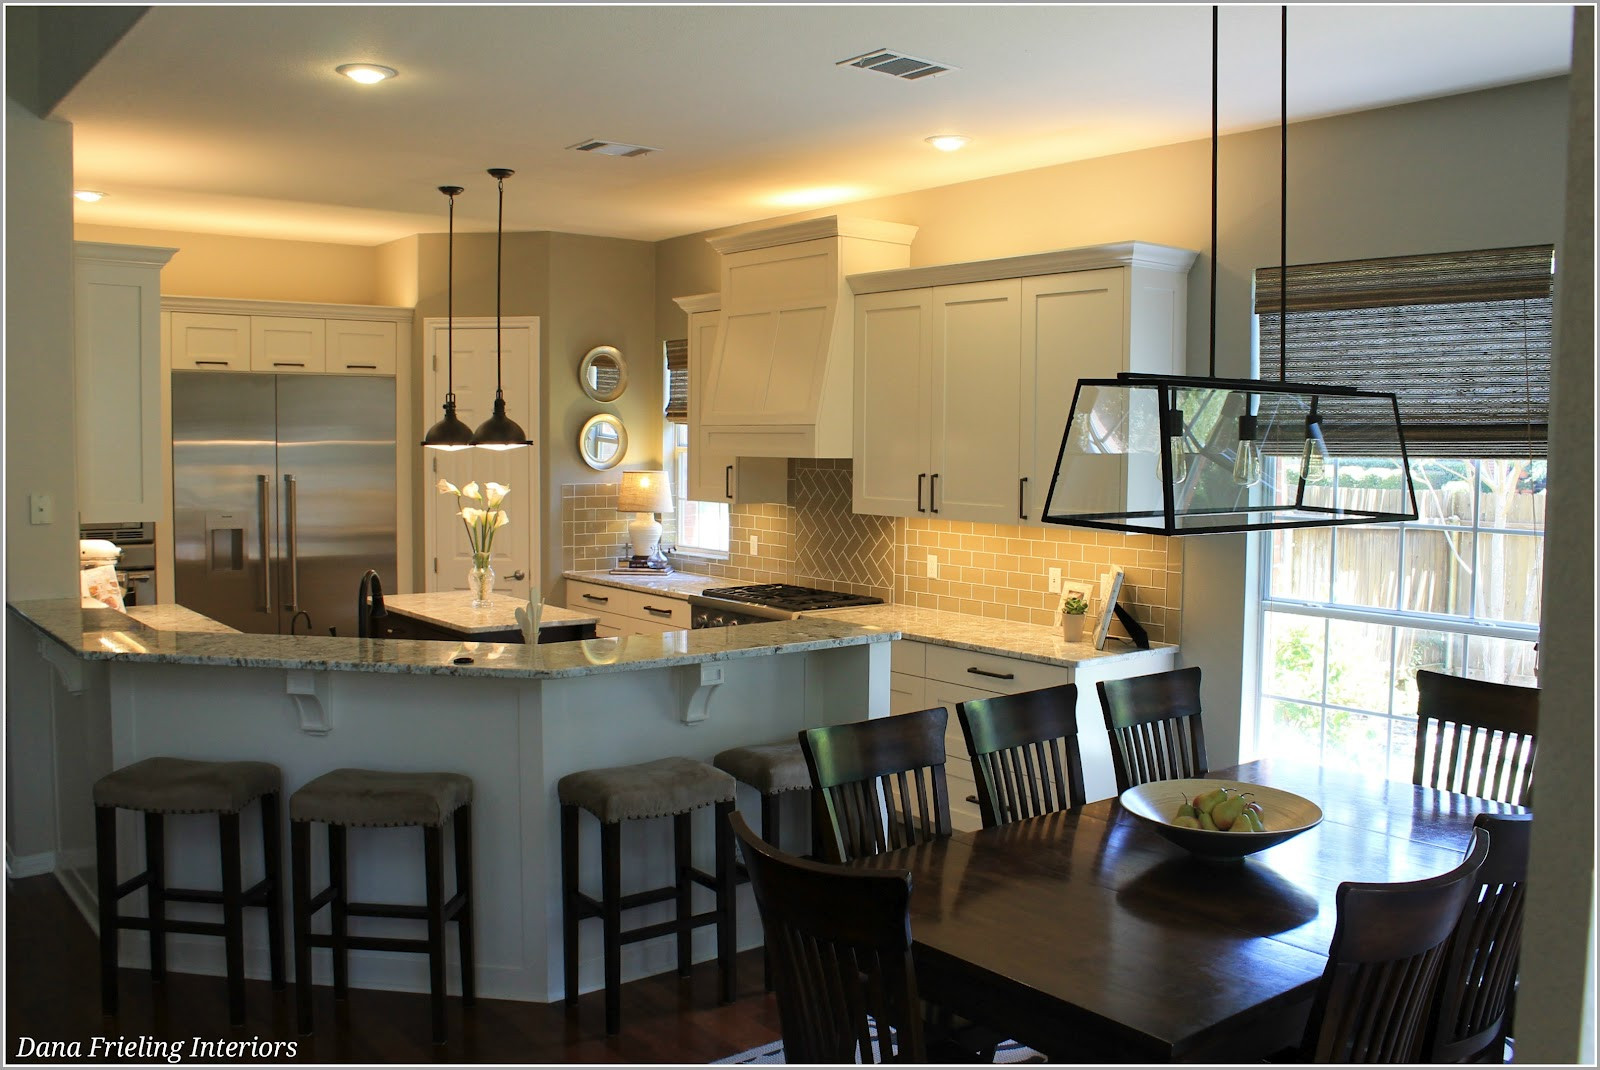 Kitchen Remodel Before And After
 Make Them Wonder Kitchen Remodel Before and After